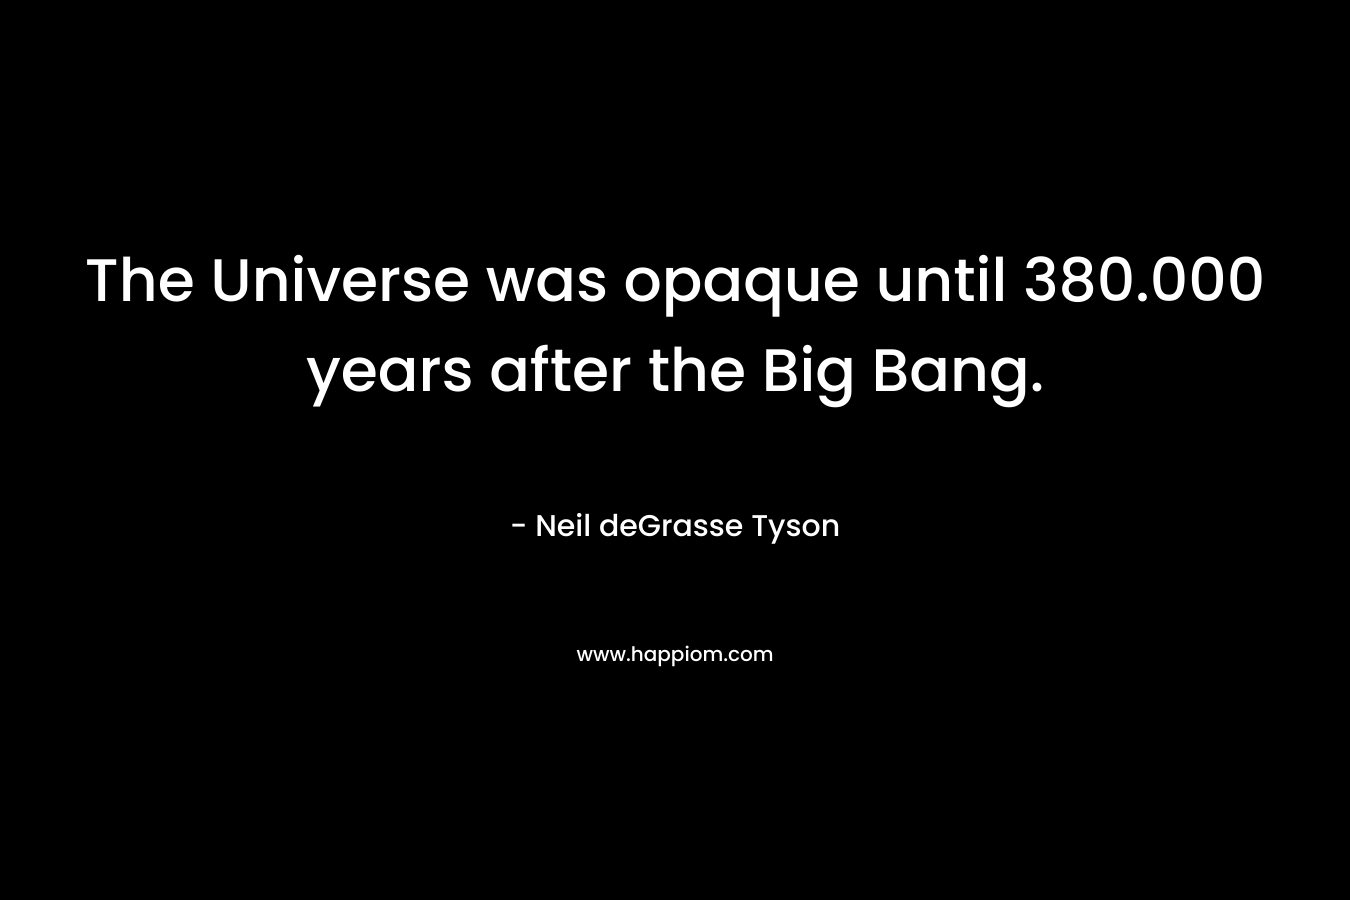 The Universe was opaque until 380.000 years after the Big Bang.